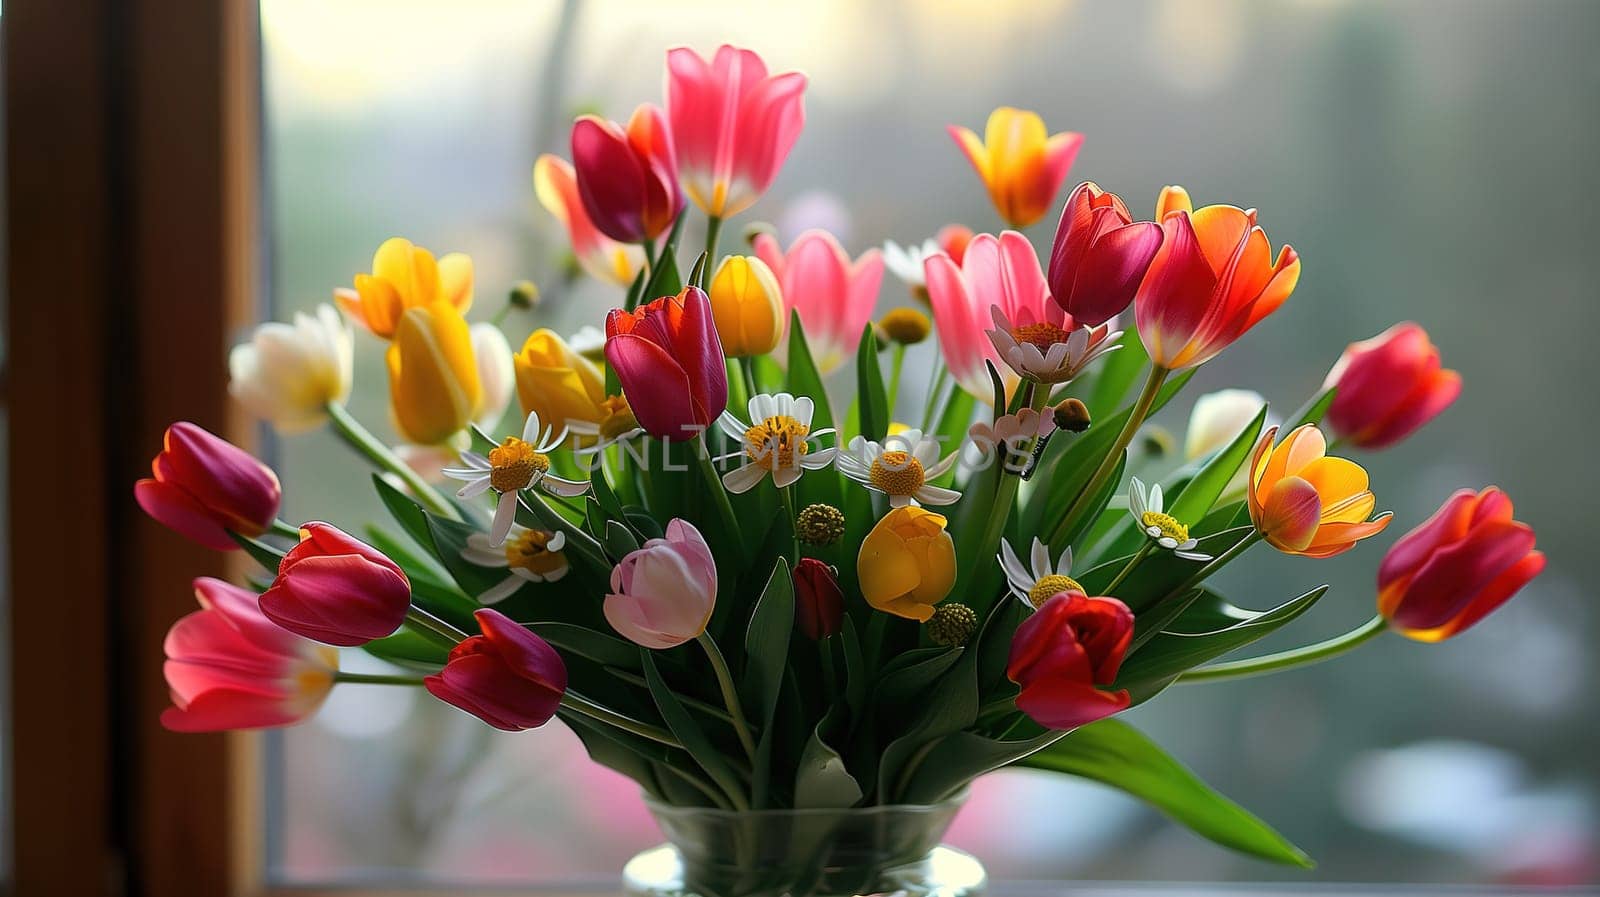 The image shows a vase brimming with a variety of vibrant and colorful flowers, creating a lively and dynamic display of natures beauty. The flowers appear to be freshly picked and arranged in the vase, creating a cheerful and visually striking centerpiece.